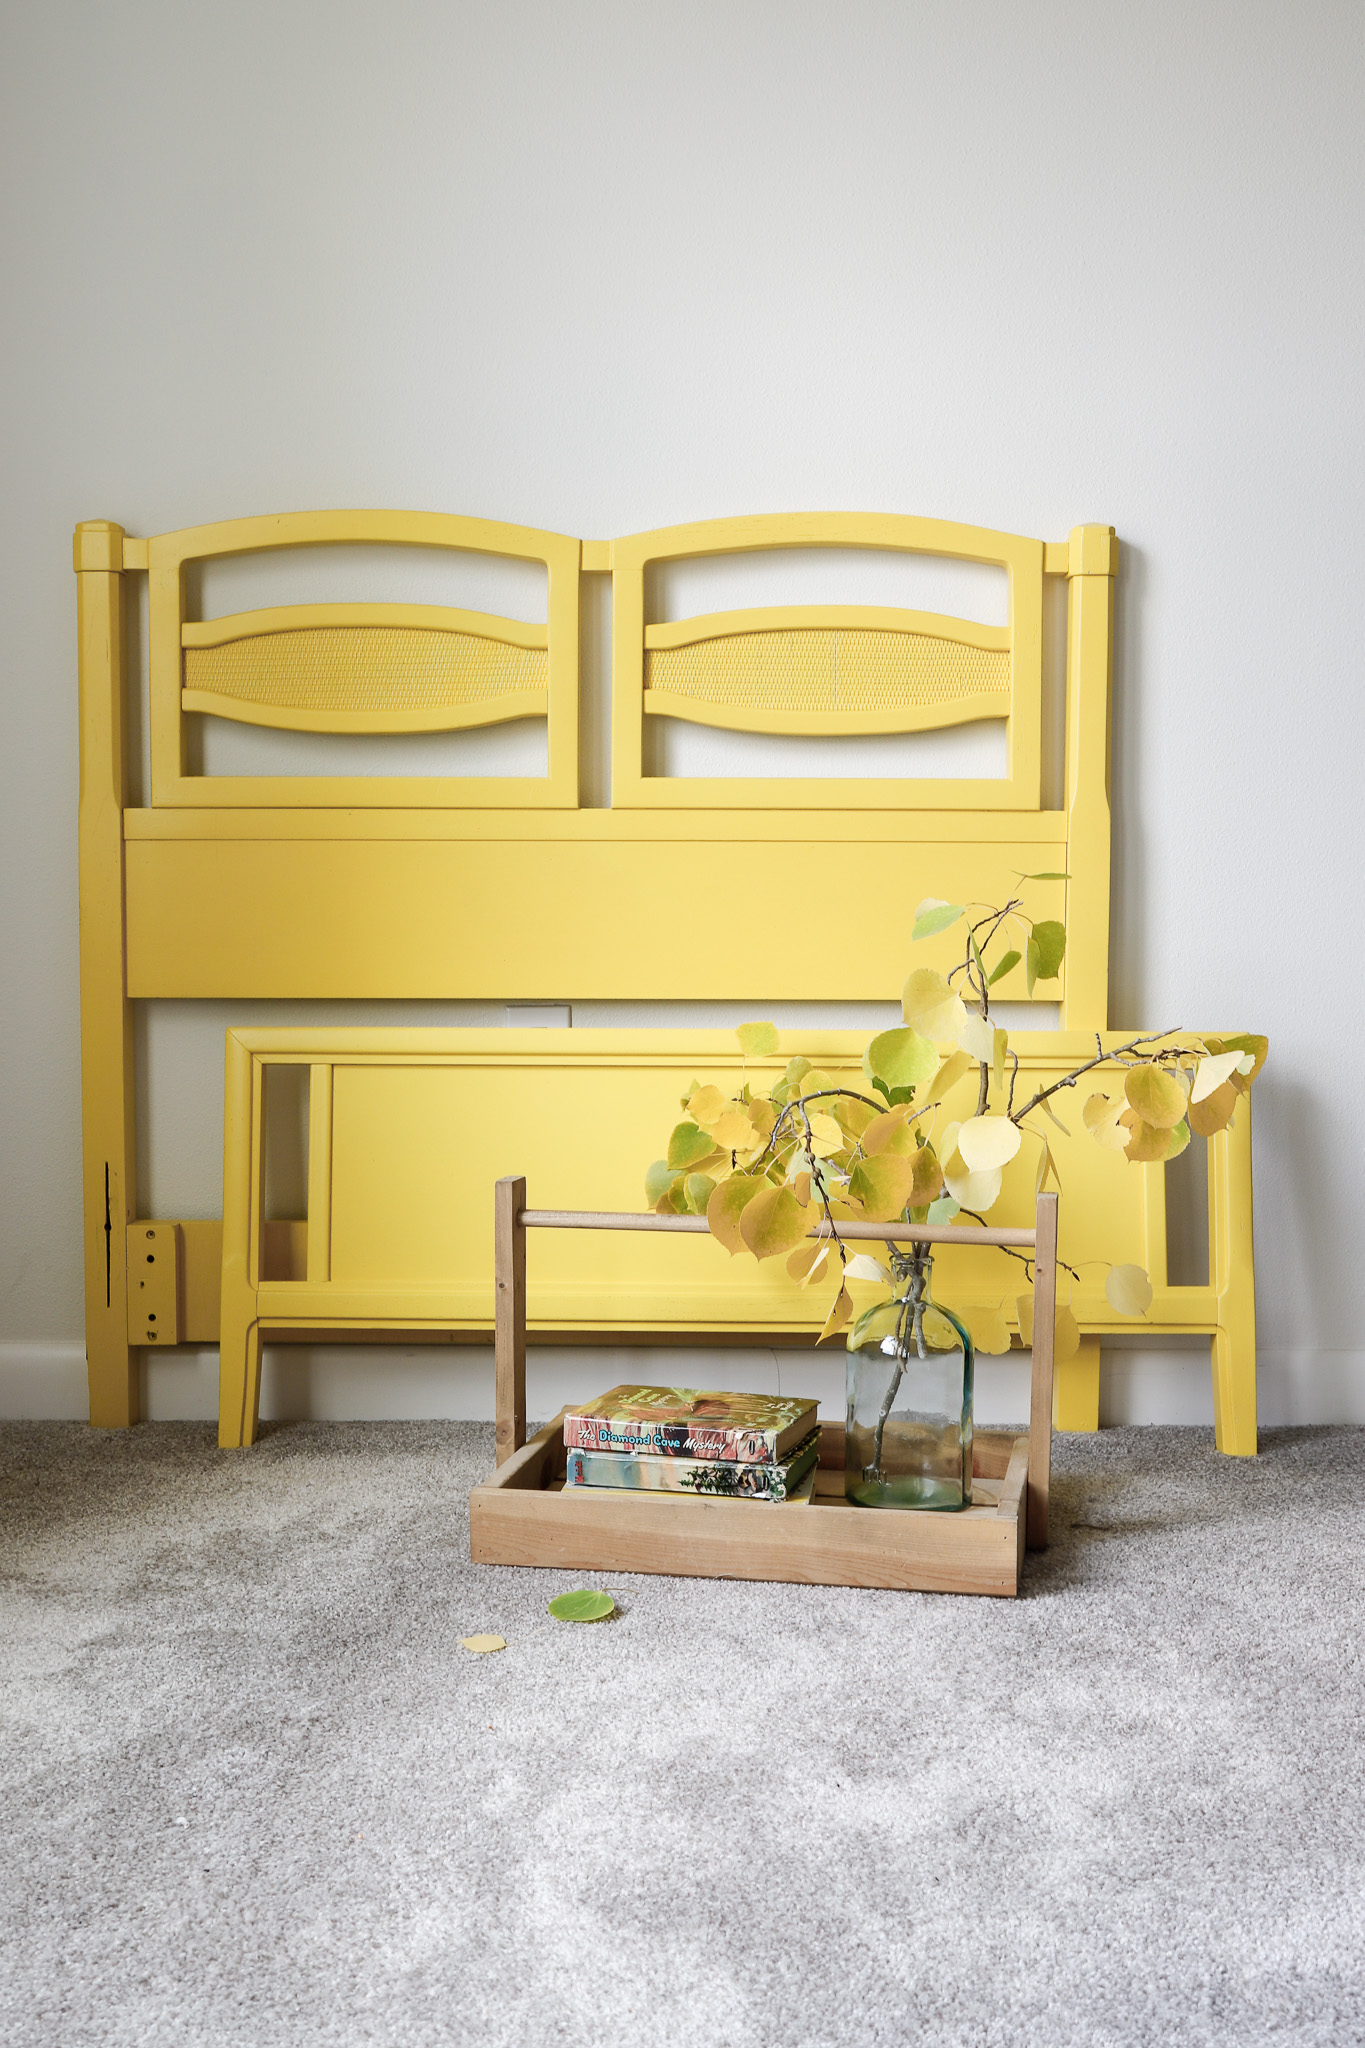 A darling vintage twin bed frame in a sunny yellow color